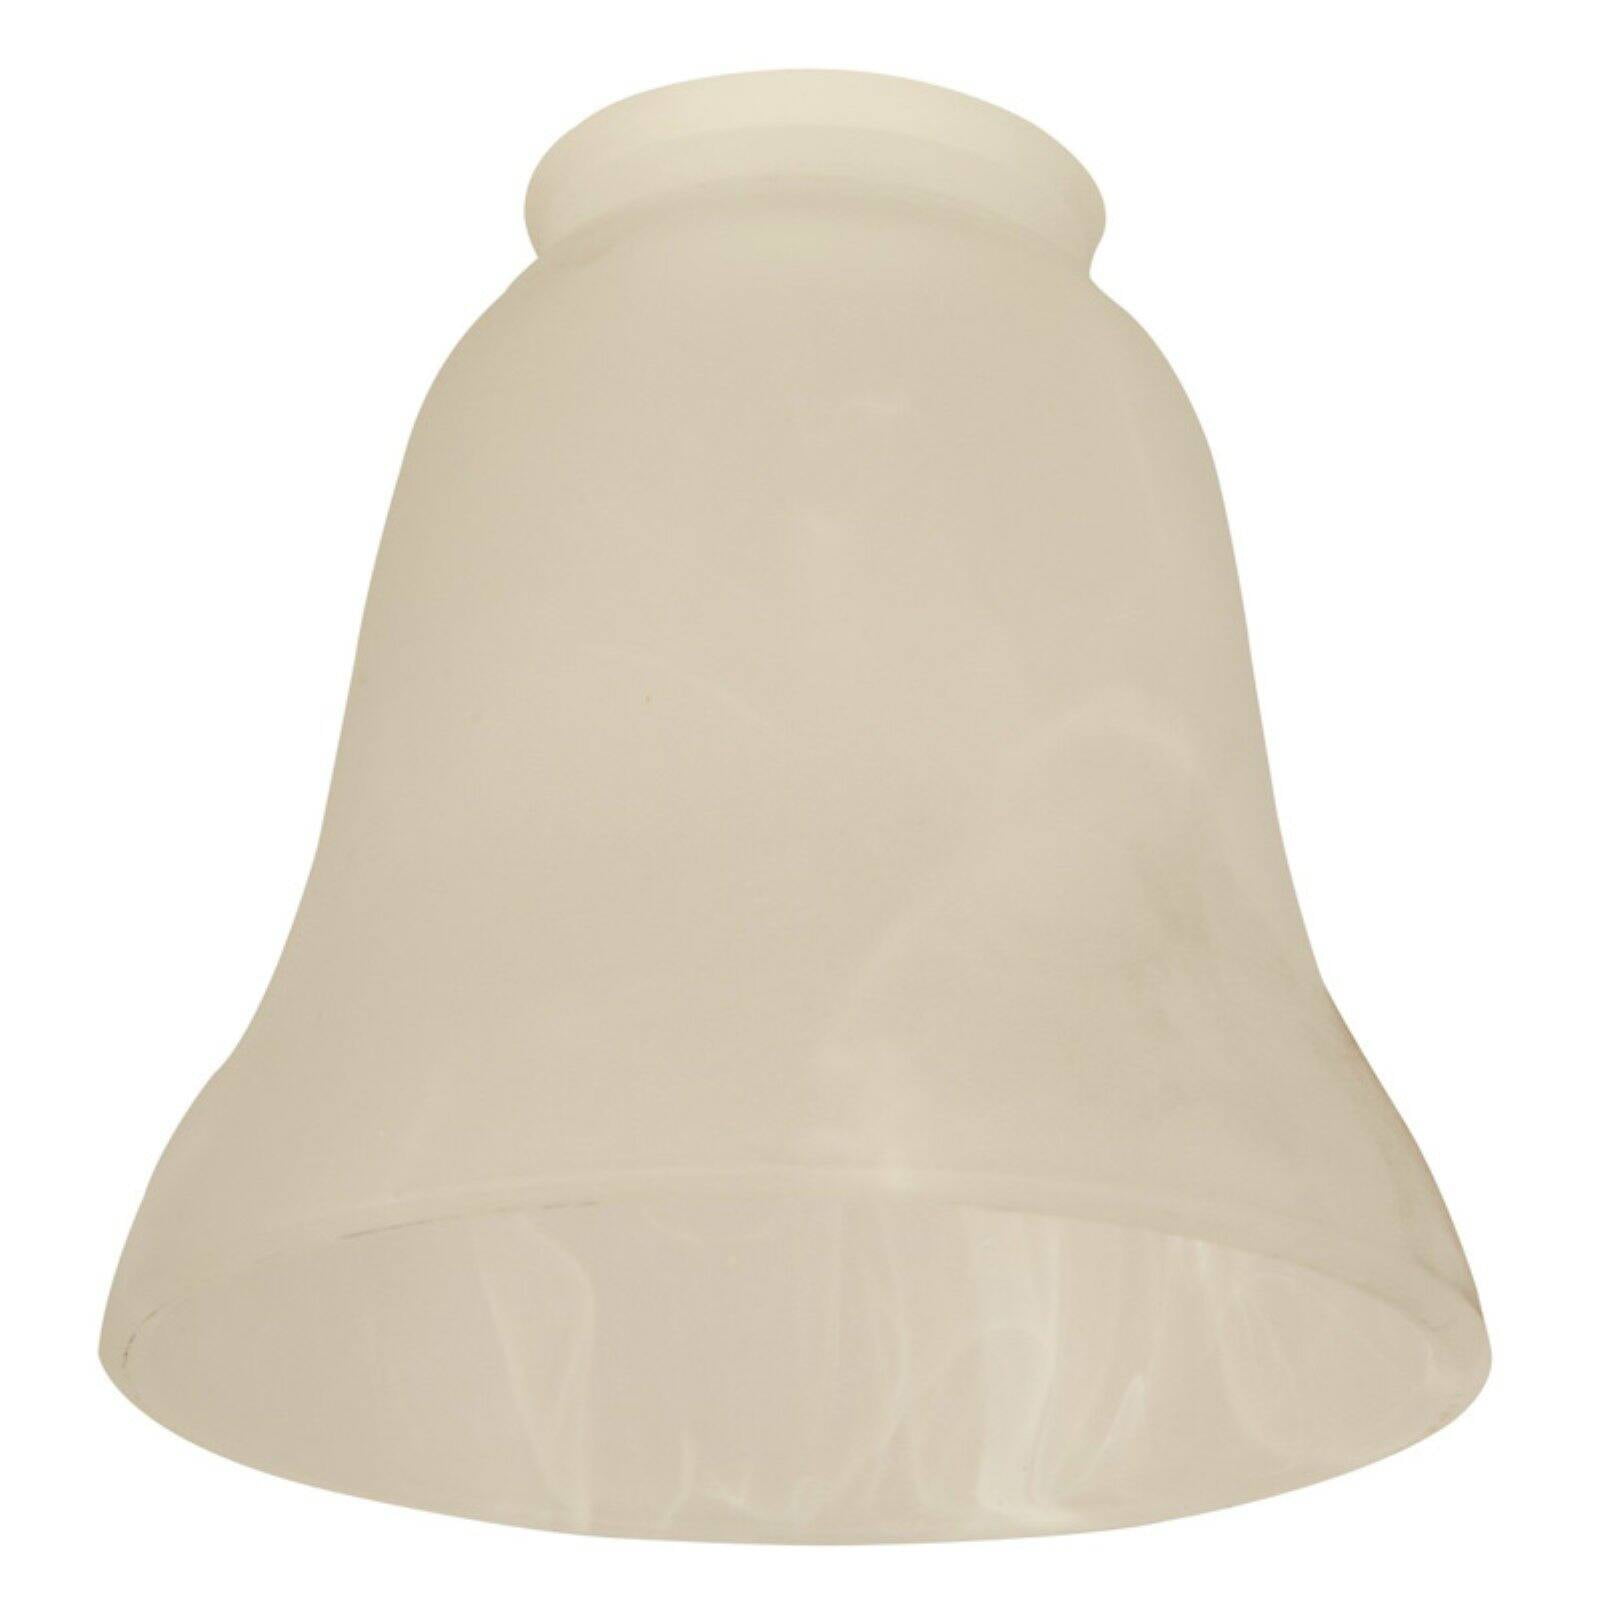 Glass Shade for MR 16 Low Votage Lighting Set of 3 white only bell shaped 